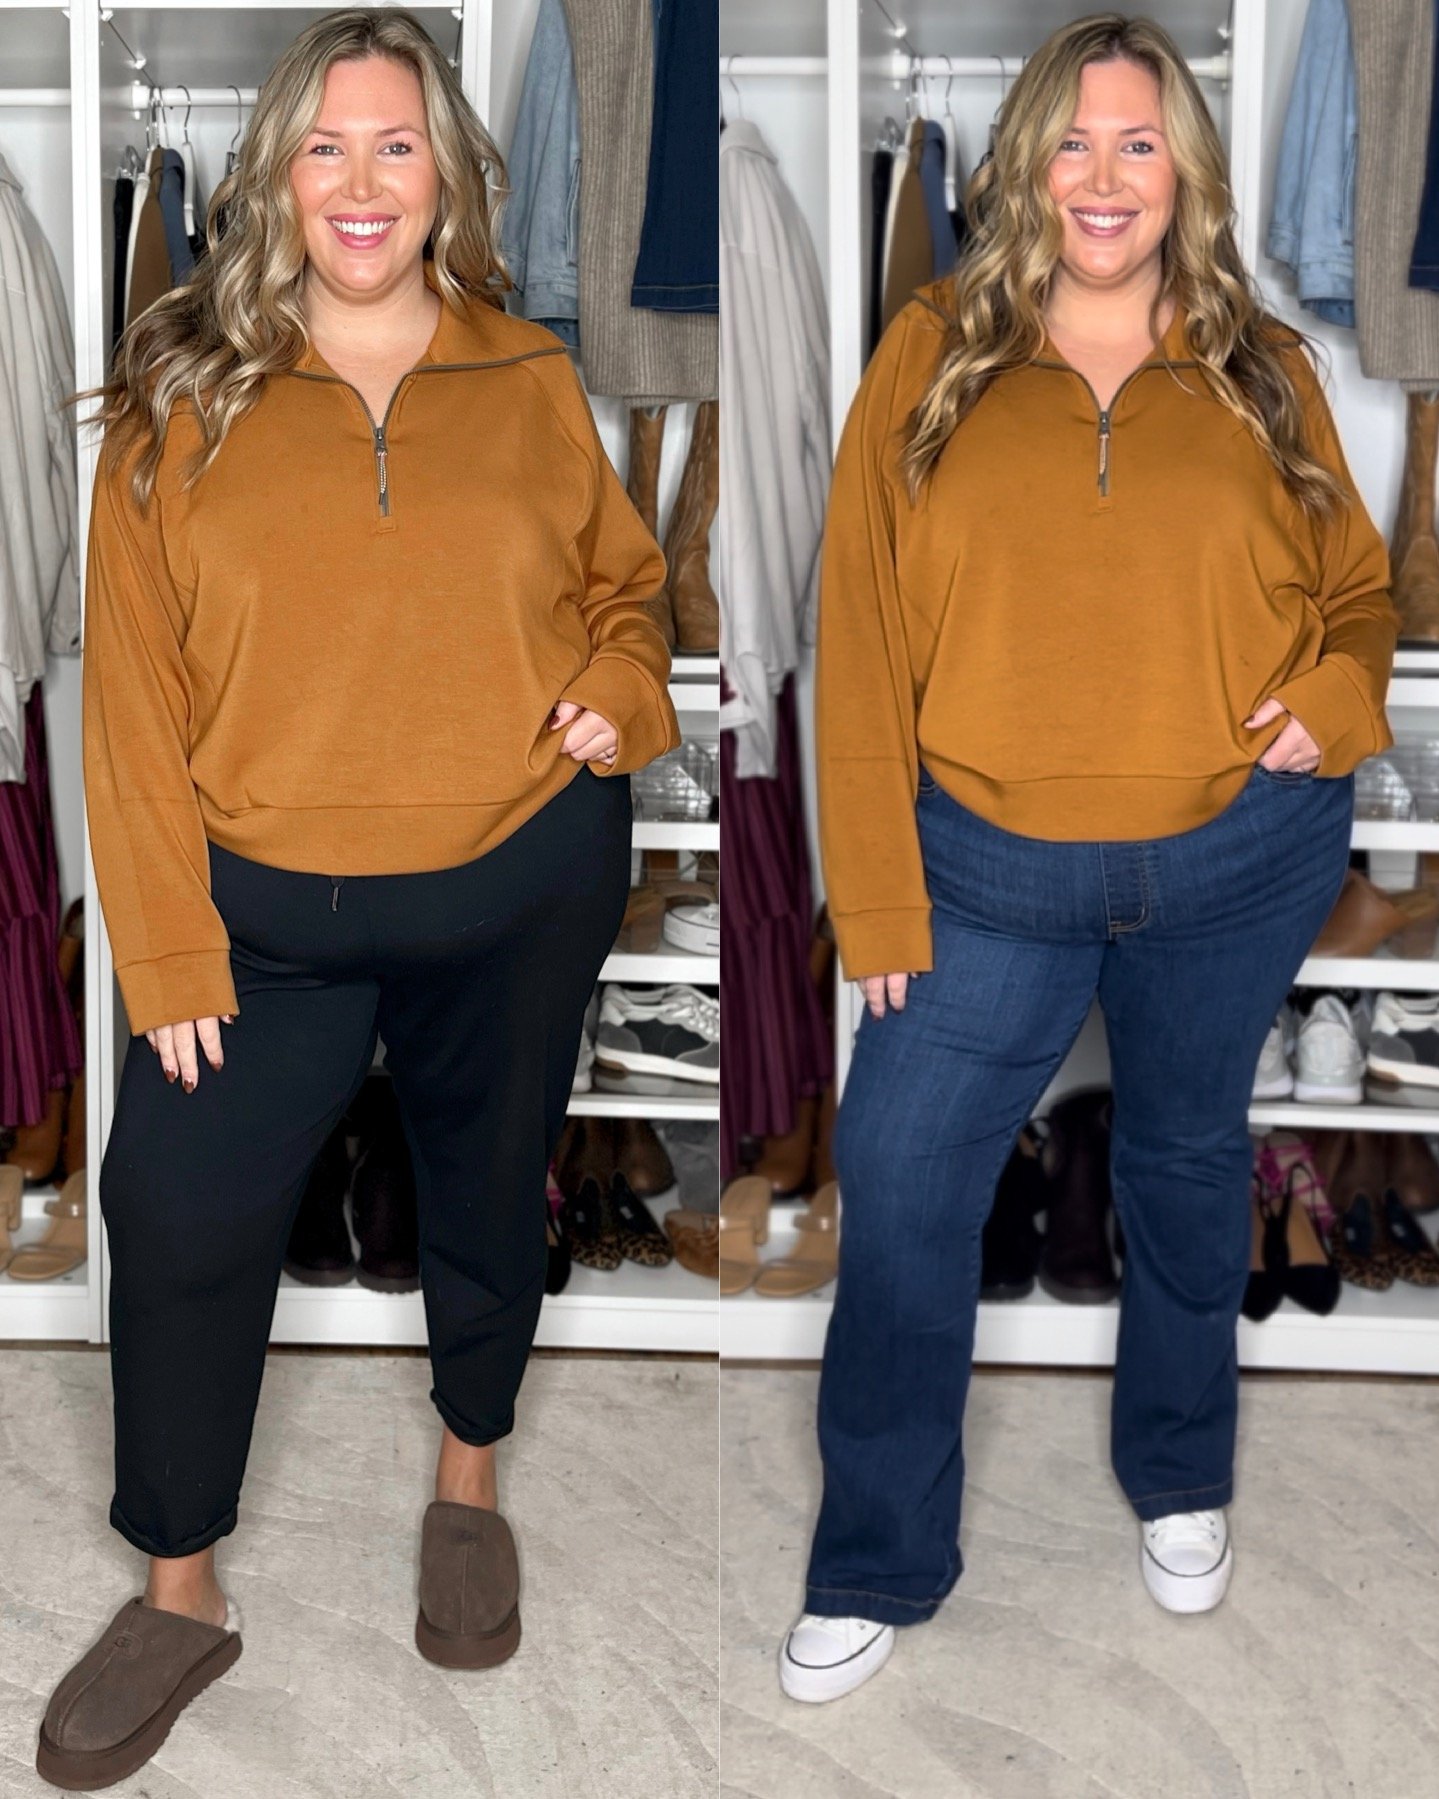 SPANX PLUS SIZE STYLE SESSION — House of Dorough